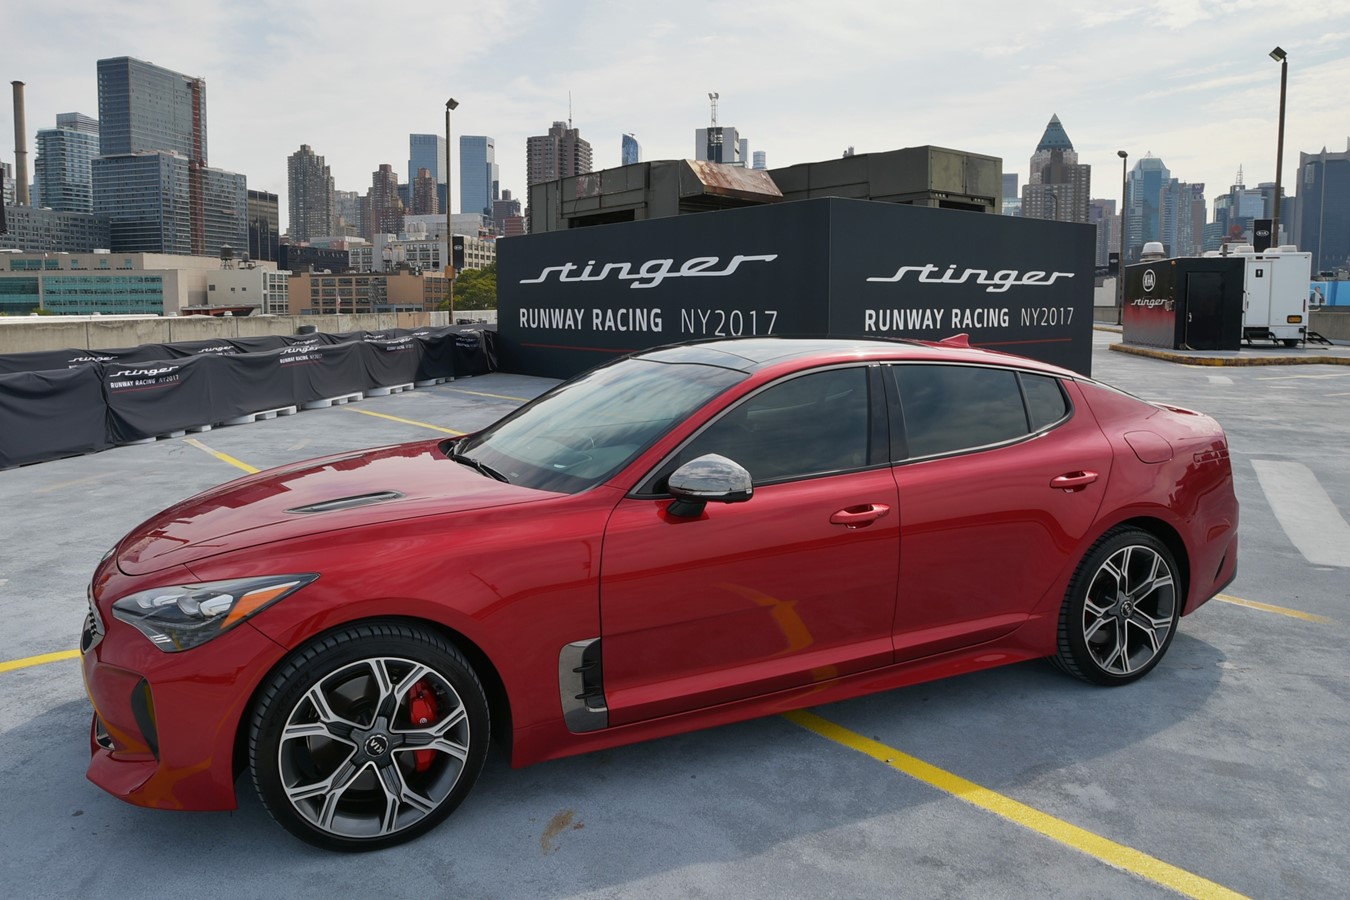 KIA MAKES THE ULTIMATE FASHION STATEMENT IN NEW YORK WITH STAR-STUDDED STINGER RUNWAY RACING CHALLENGE